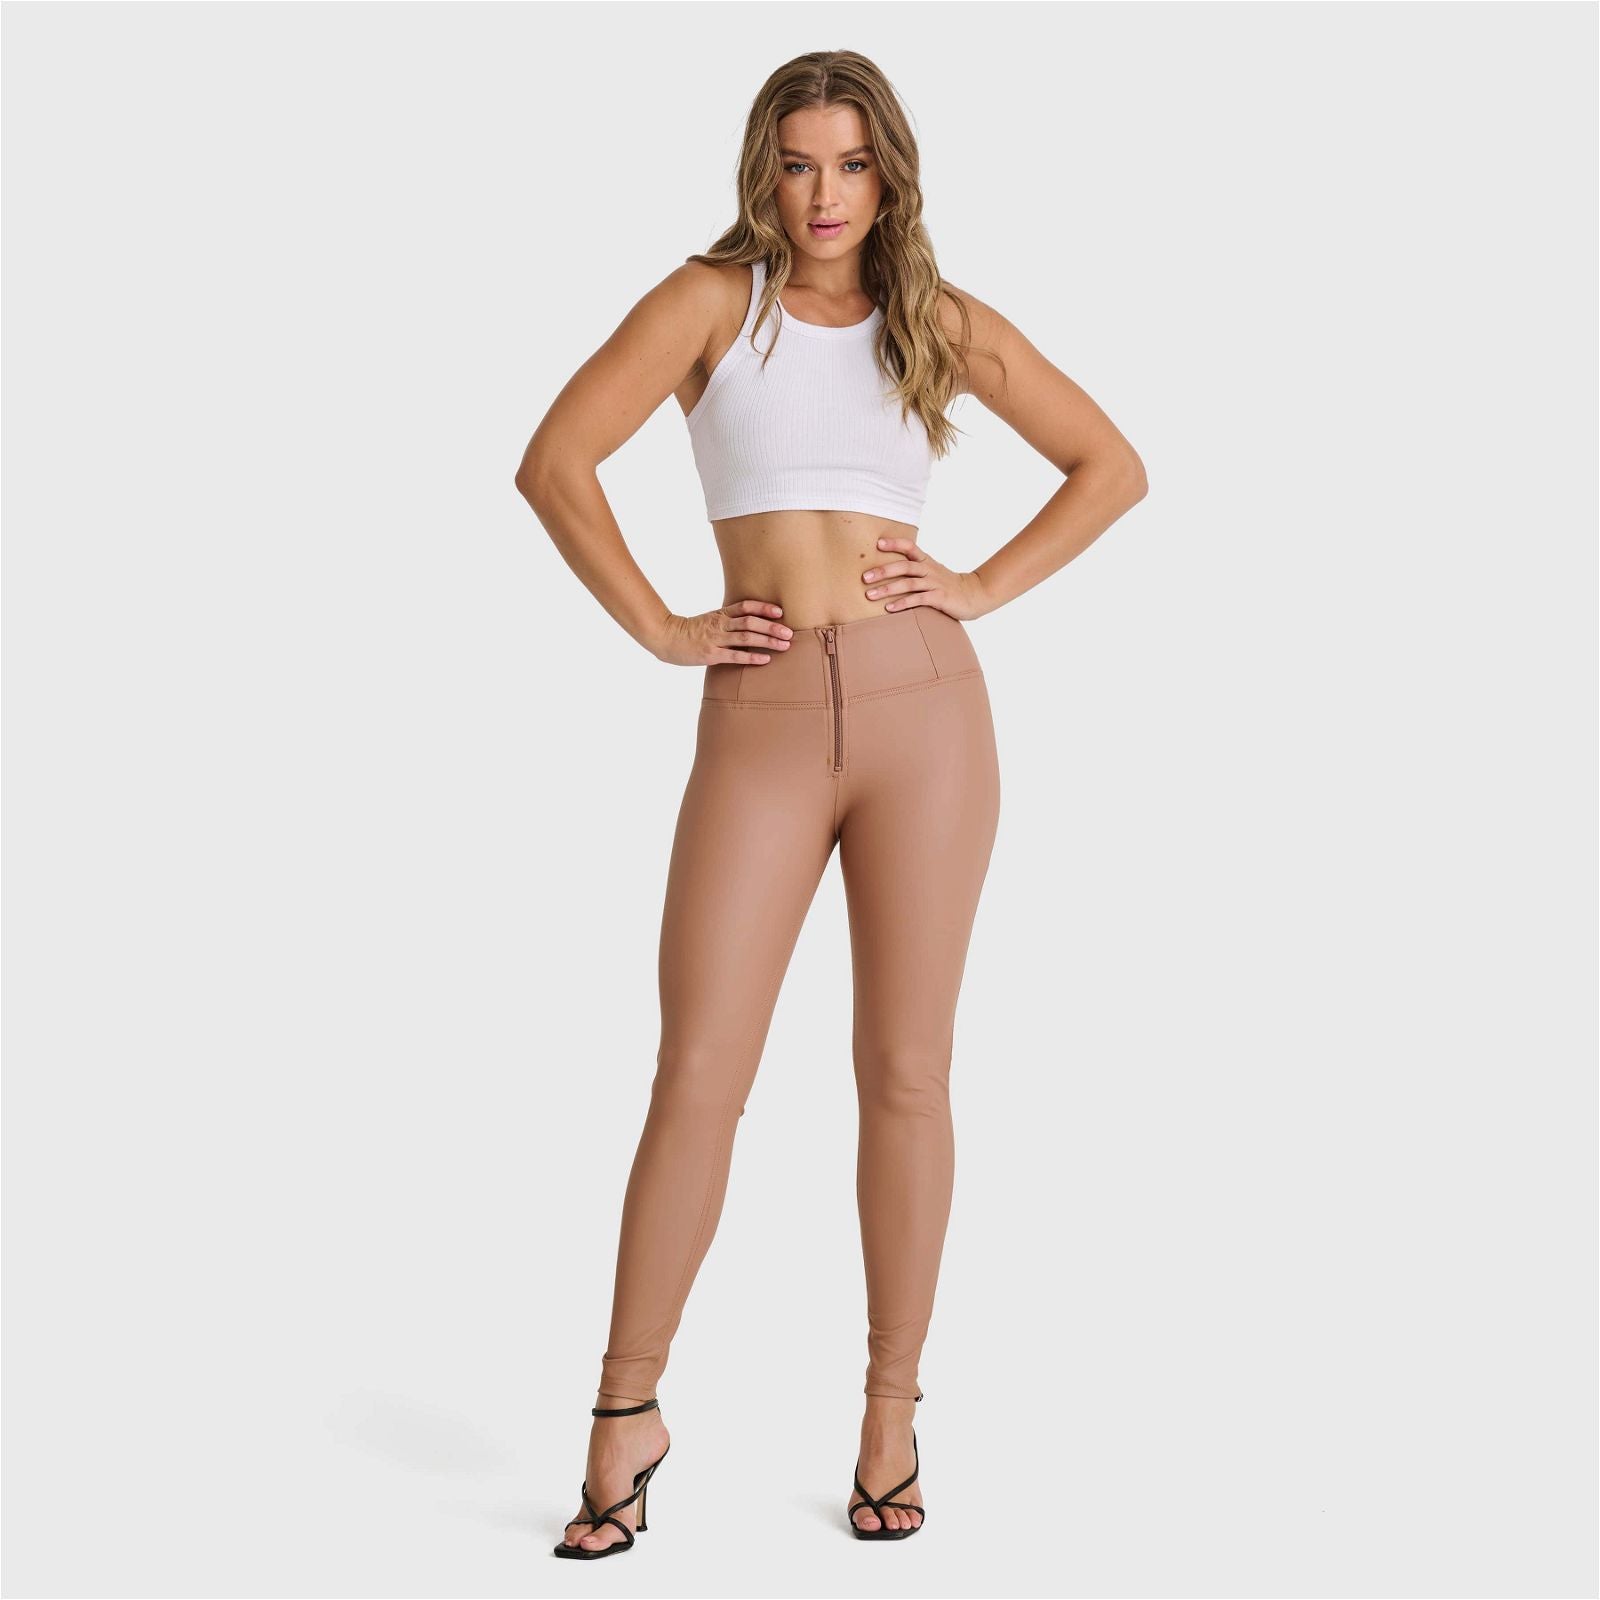 WR.UP® Faux Leather - High Waisted - Full Length - Mocha 2